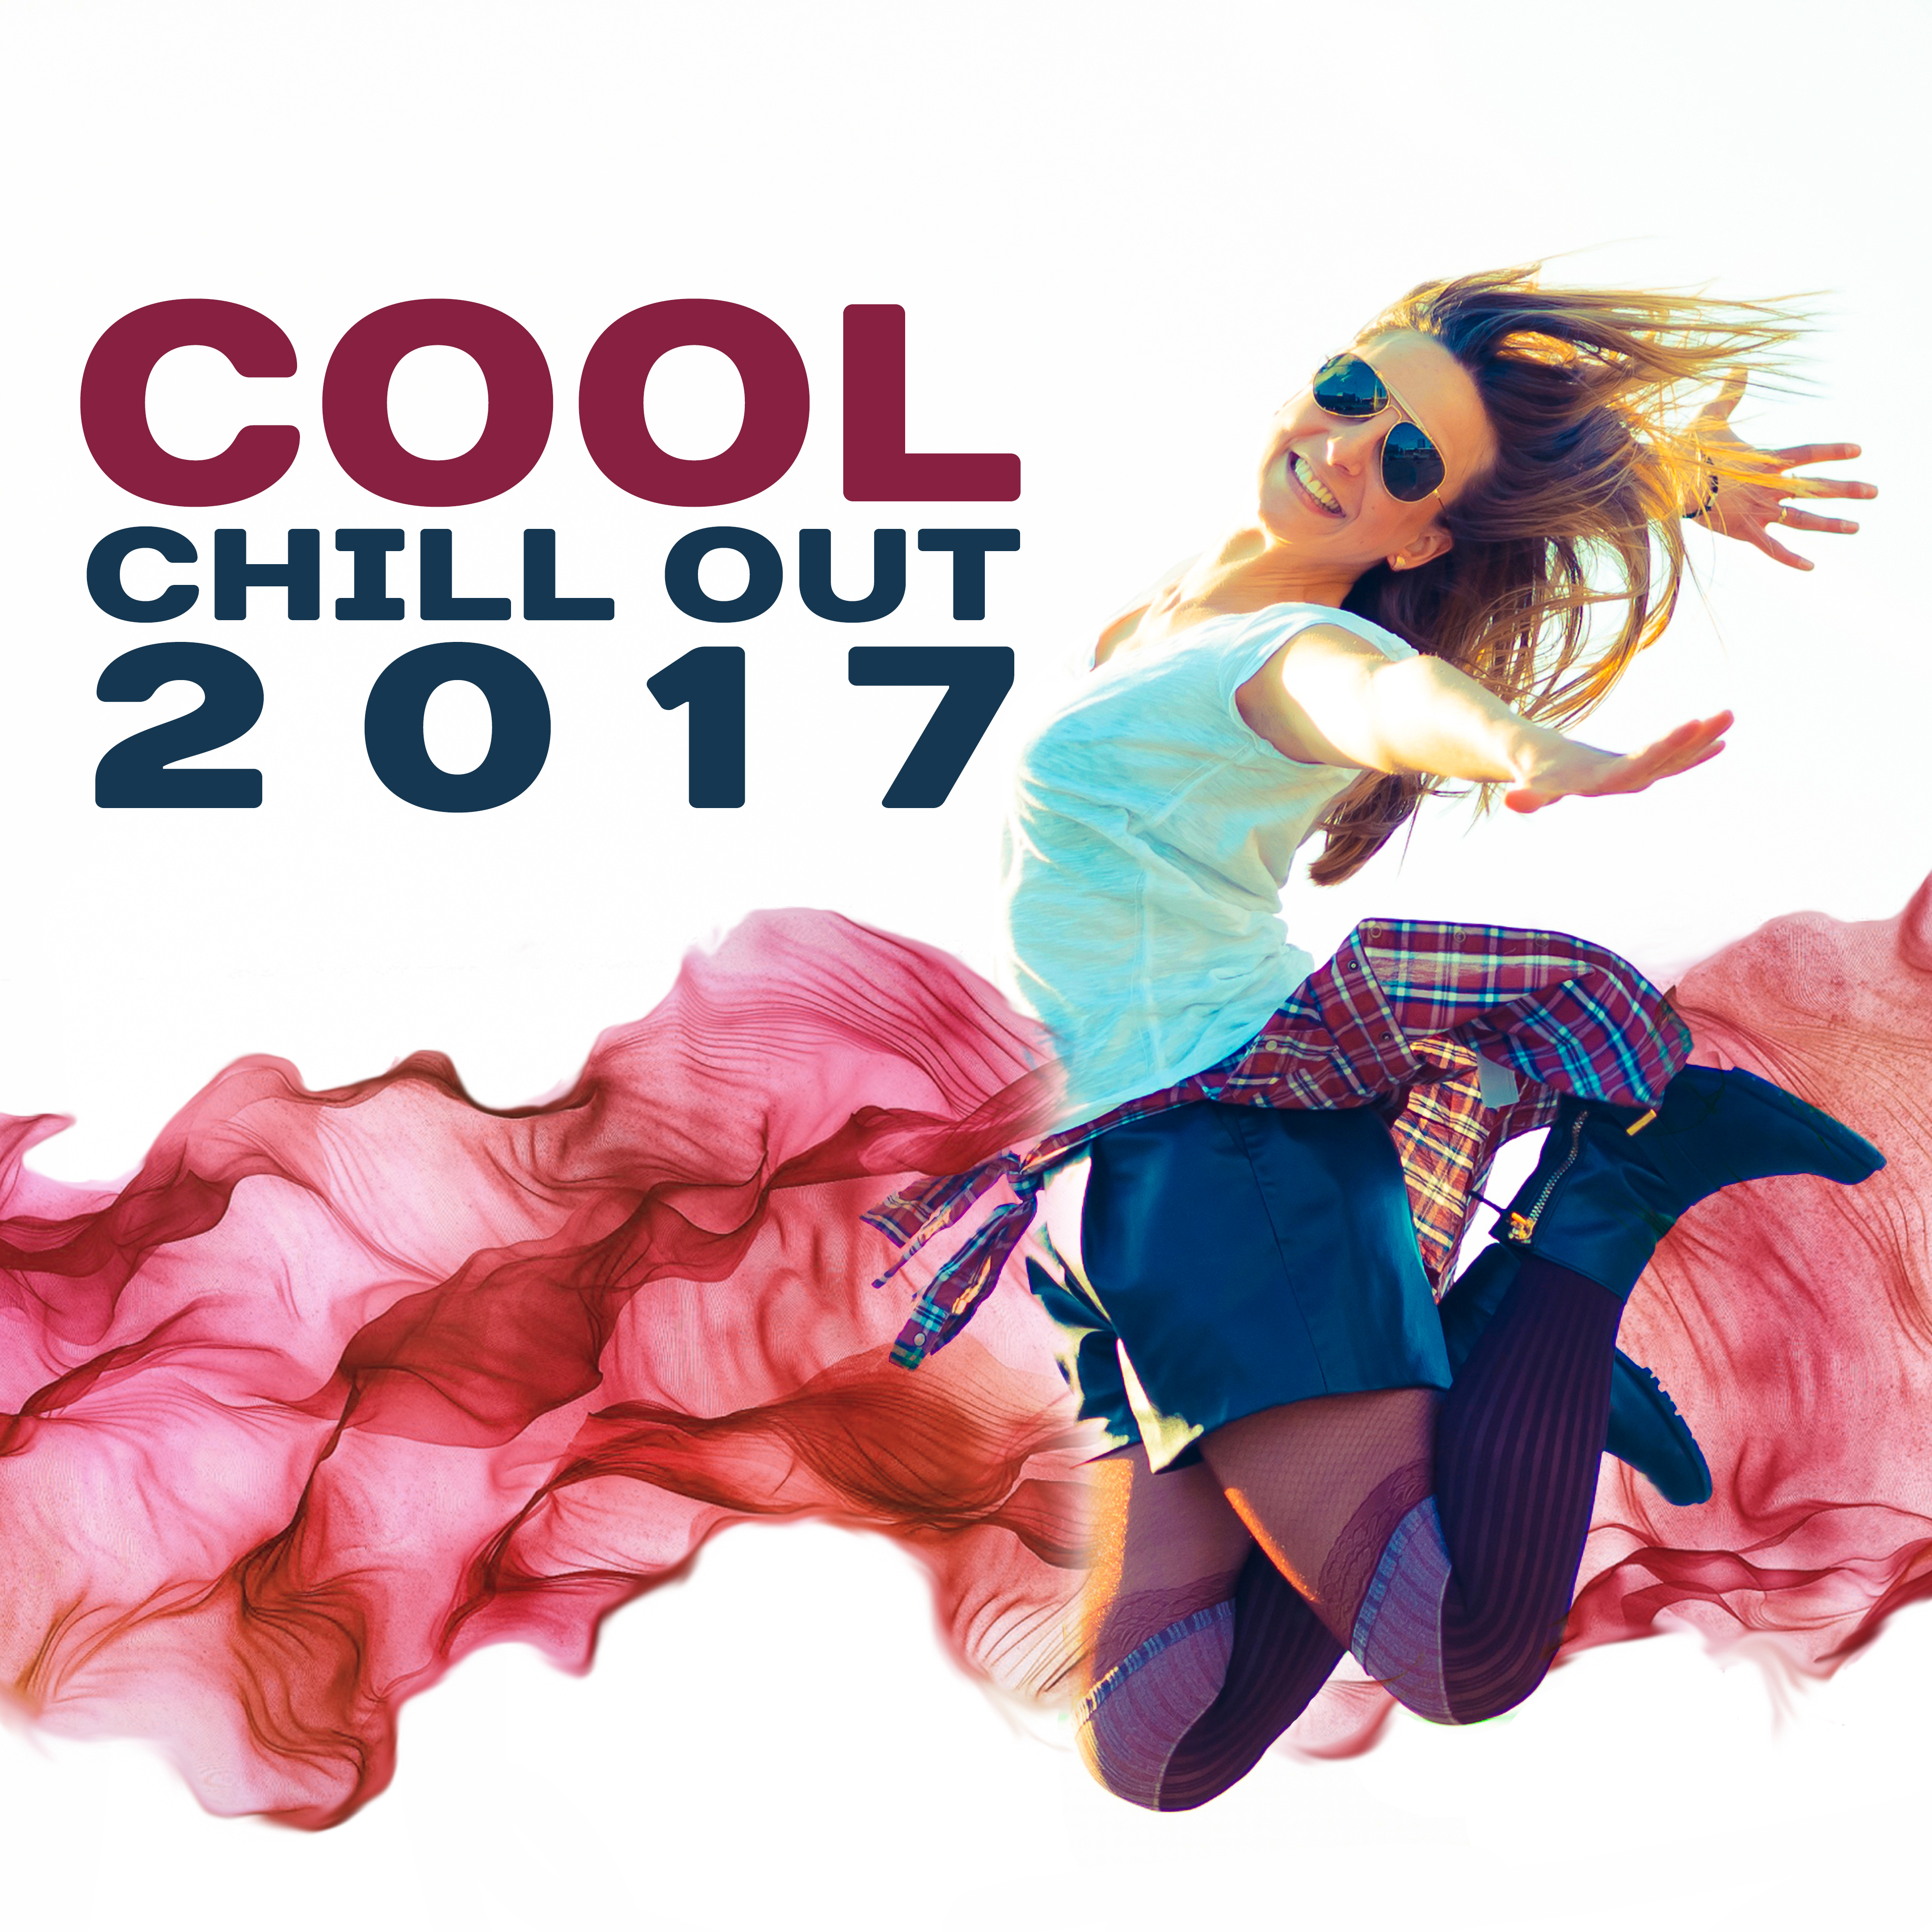 Cool Chill Out 2017 - Relaxed Chill, Summer Music, Chill Out 2017, Party, Dance